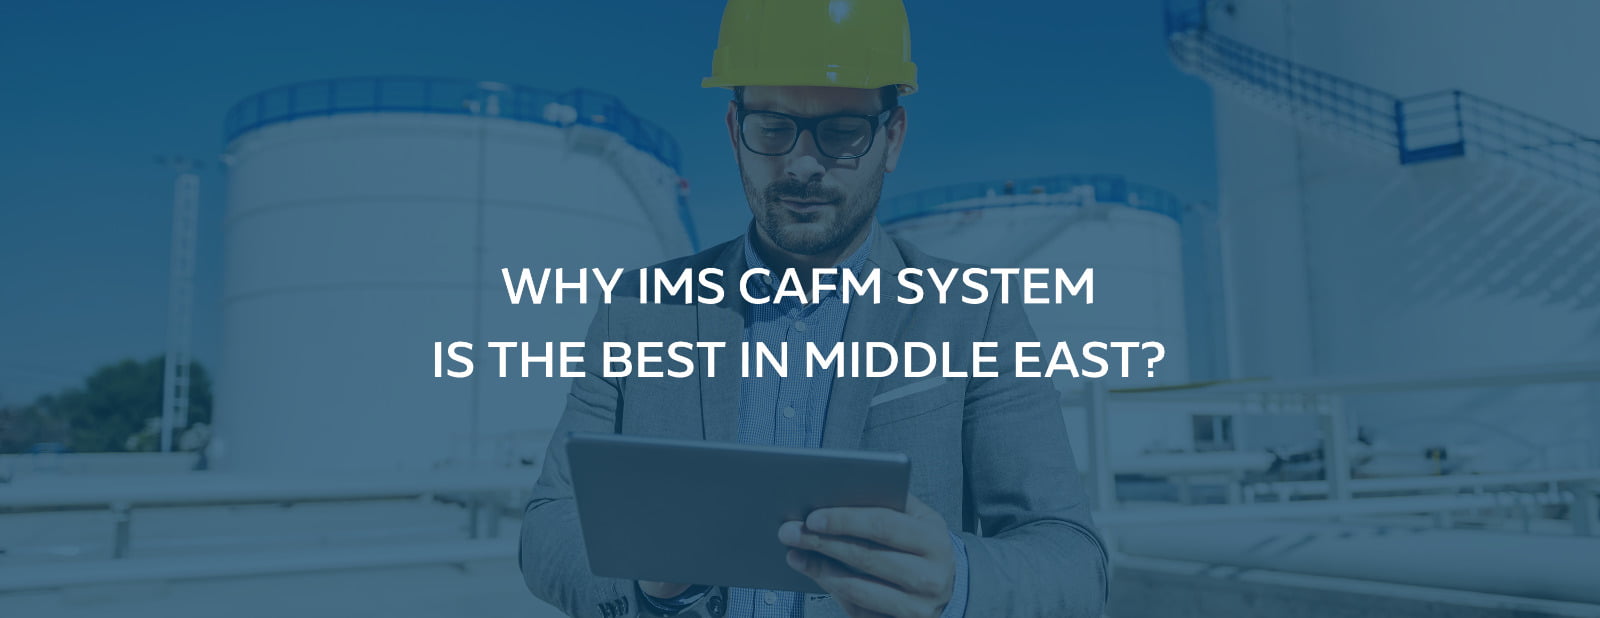 Why IMS CAFM System is The Best in Middle East?